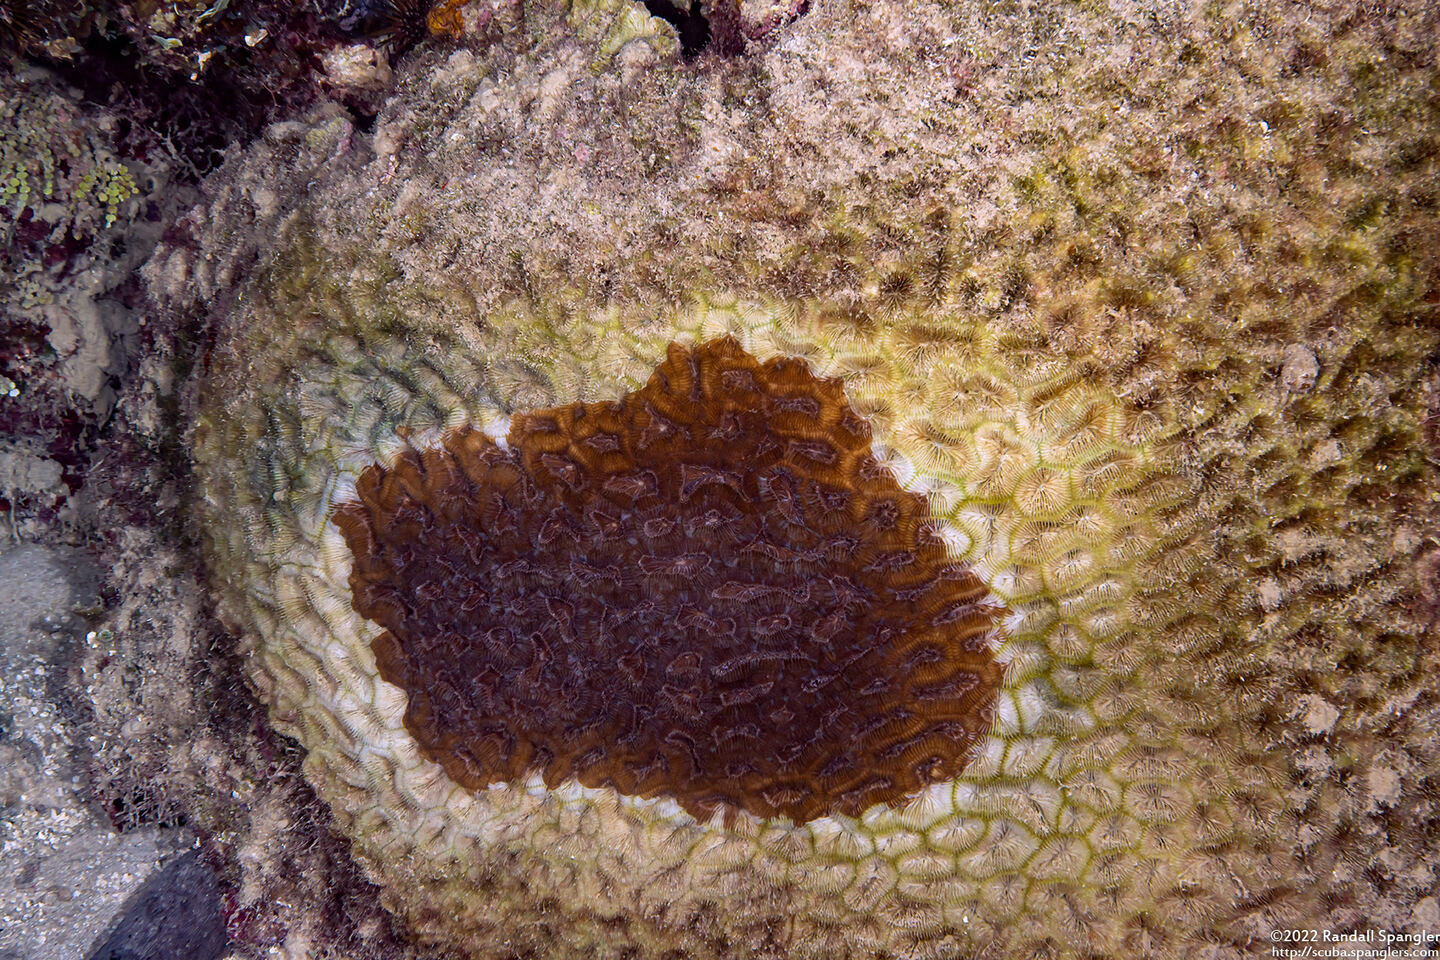 Colpophyllia natans (Boulder Brain Coral); Coral dying and being covered by algae